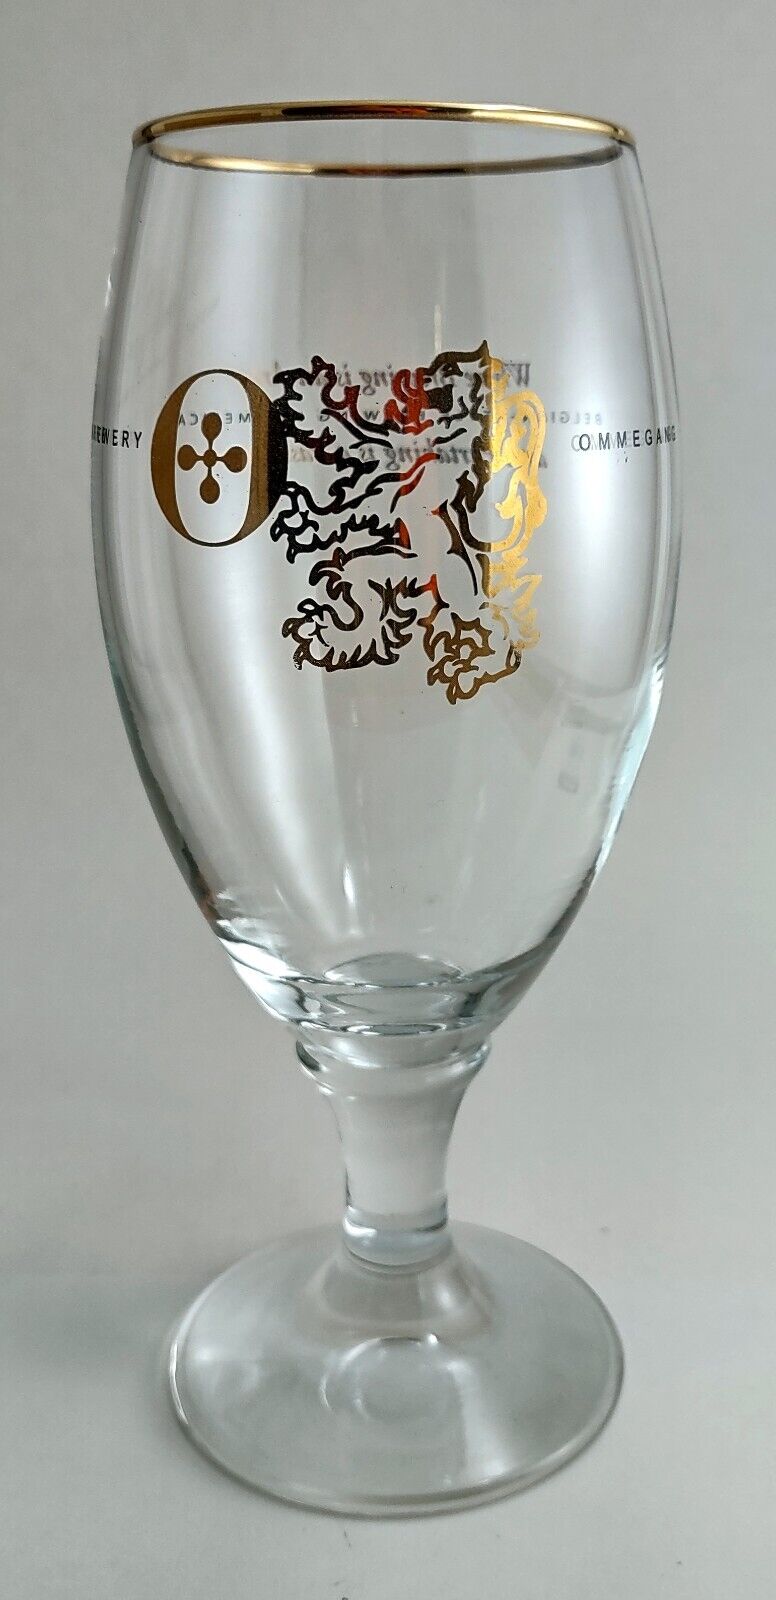 Ommegang Brewery Cooperstown NY Gold Rimmed Chalice Stem Footed Beer Glass